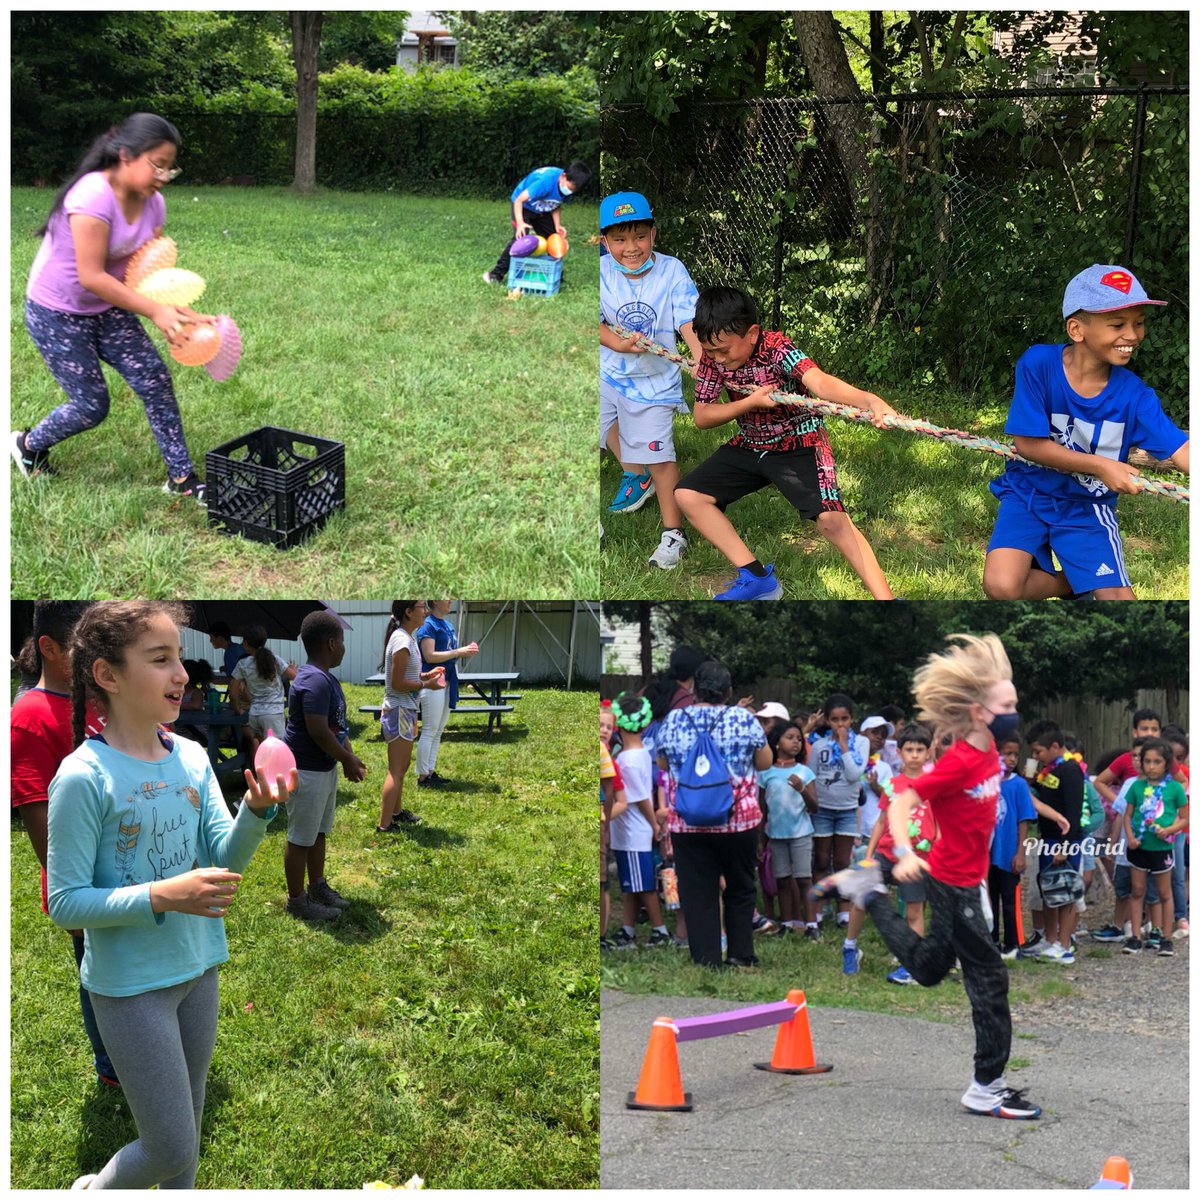 When the big kids come out for Field Day…<a target='_blank' href='http://twitter.com/BarcroftEagles'>@BarcroftEagles</a> <a target='_blank' href='http://twitter.com/GabyRivasAPS'>@GabyRivasAPS</a> <a target='_blank' href='http://twitter.com/teachnpe'>@teachnpe</a> <a target='_blank' href='http://twitter.com/BiBaChat'>@BiBaChat</a> <a target='_blank' href='http://twitter.com/lombardiclass'>@lombardiclass</a> <a target='_blank' href='https://t.co/9HhIl1ry7U'>https://t.co/9HhIl1ry7U</a>